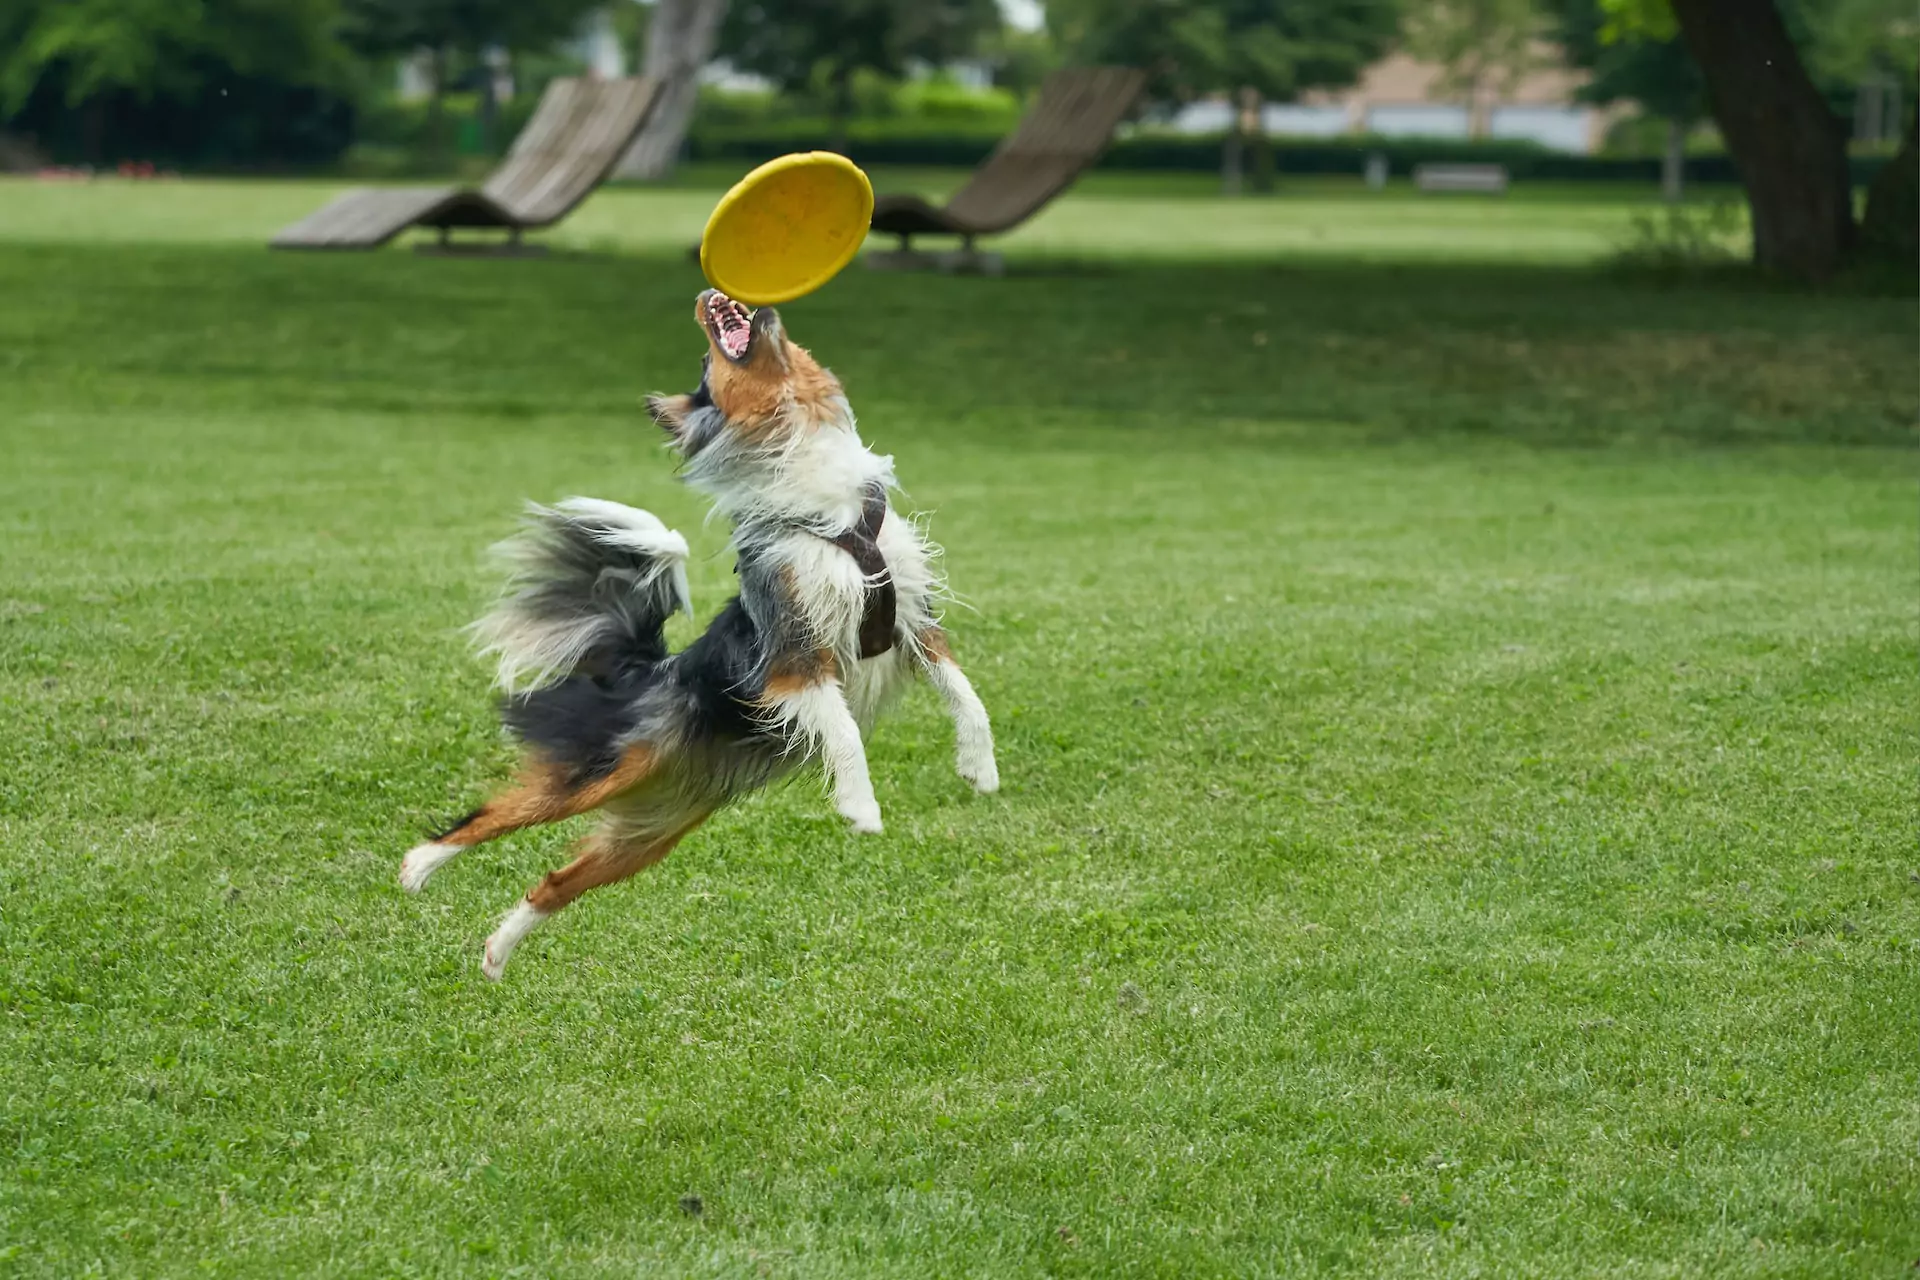 dog with black brown and white fur catching a yellow frisbee midair